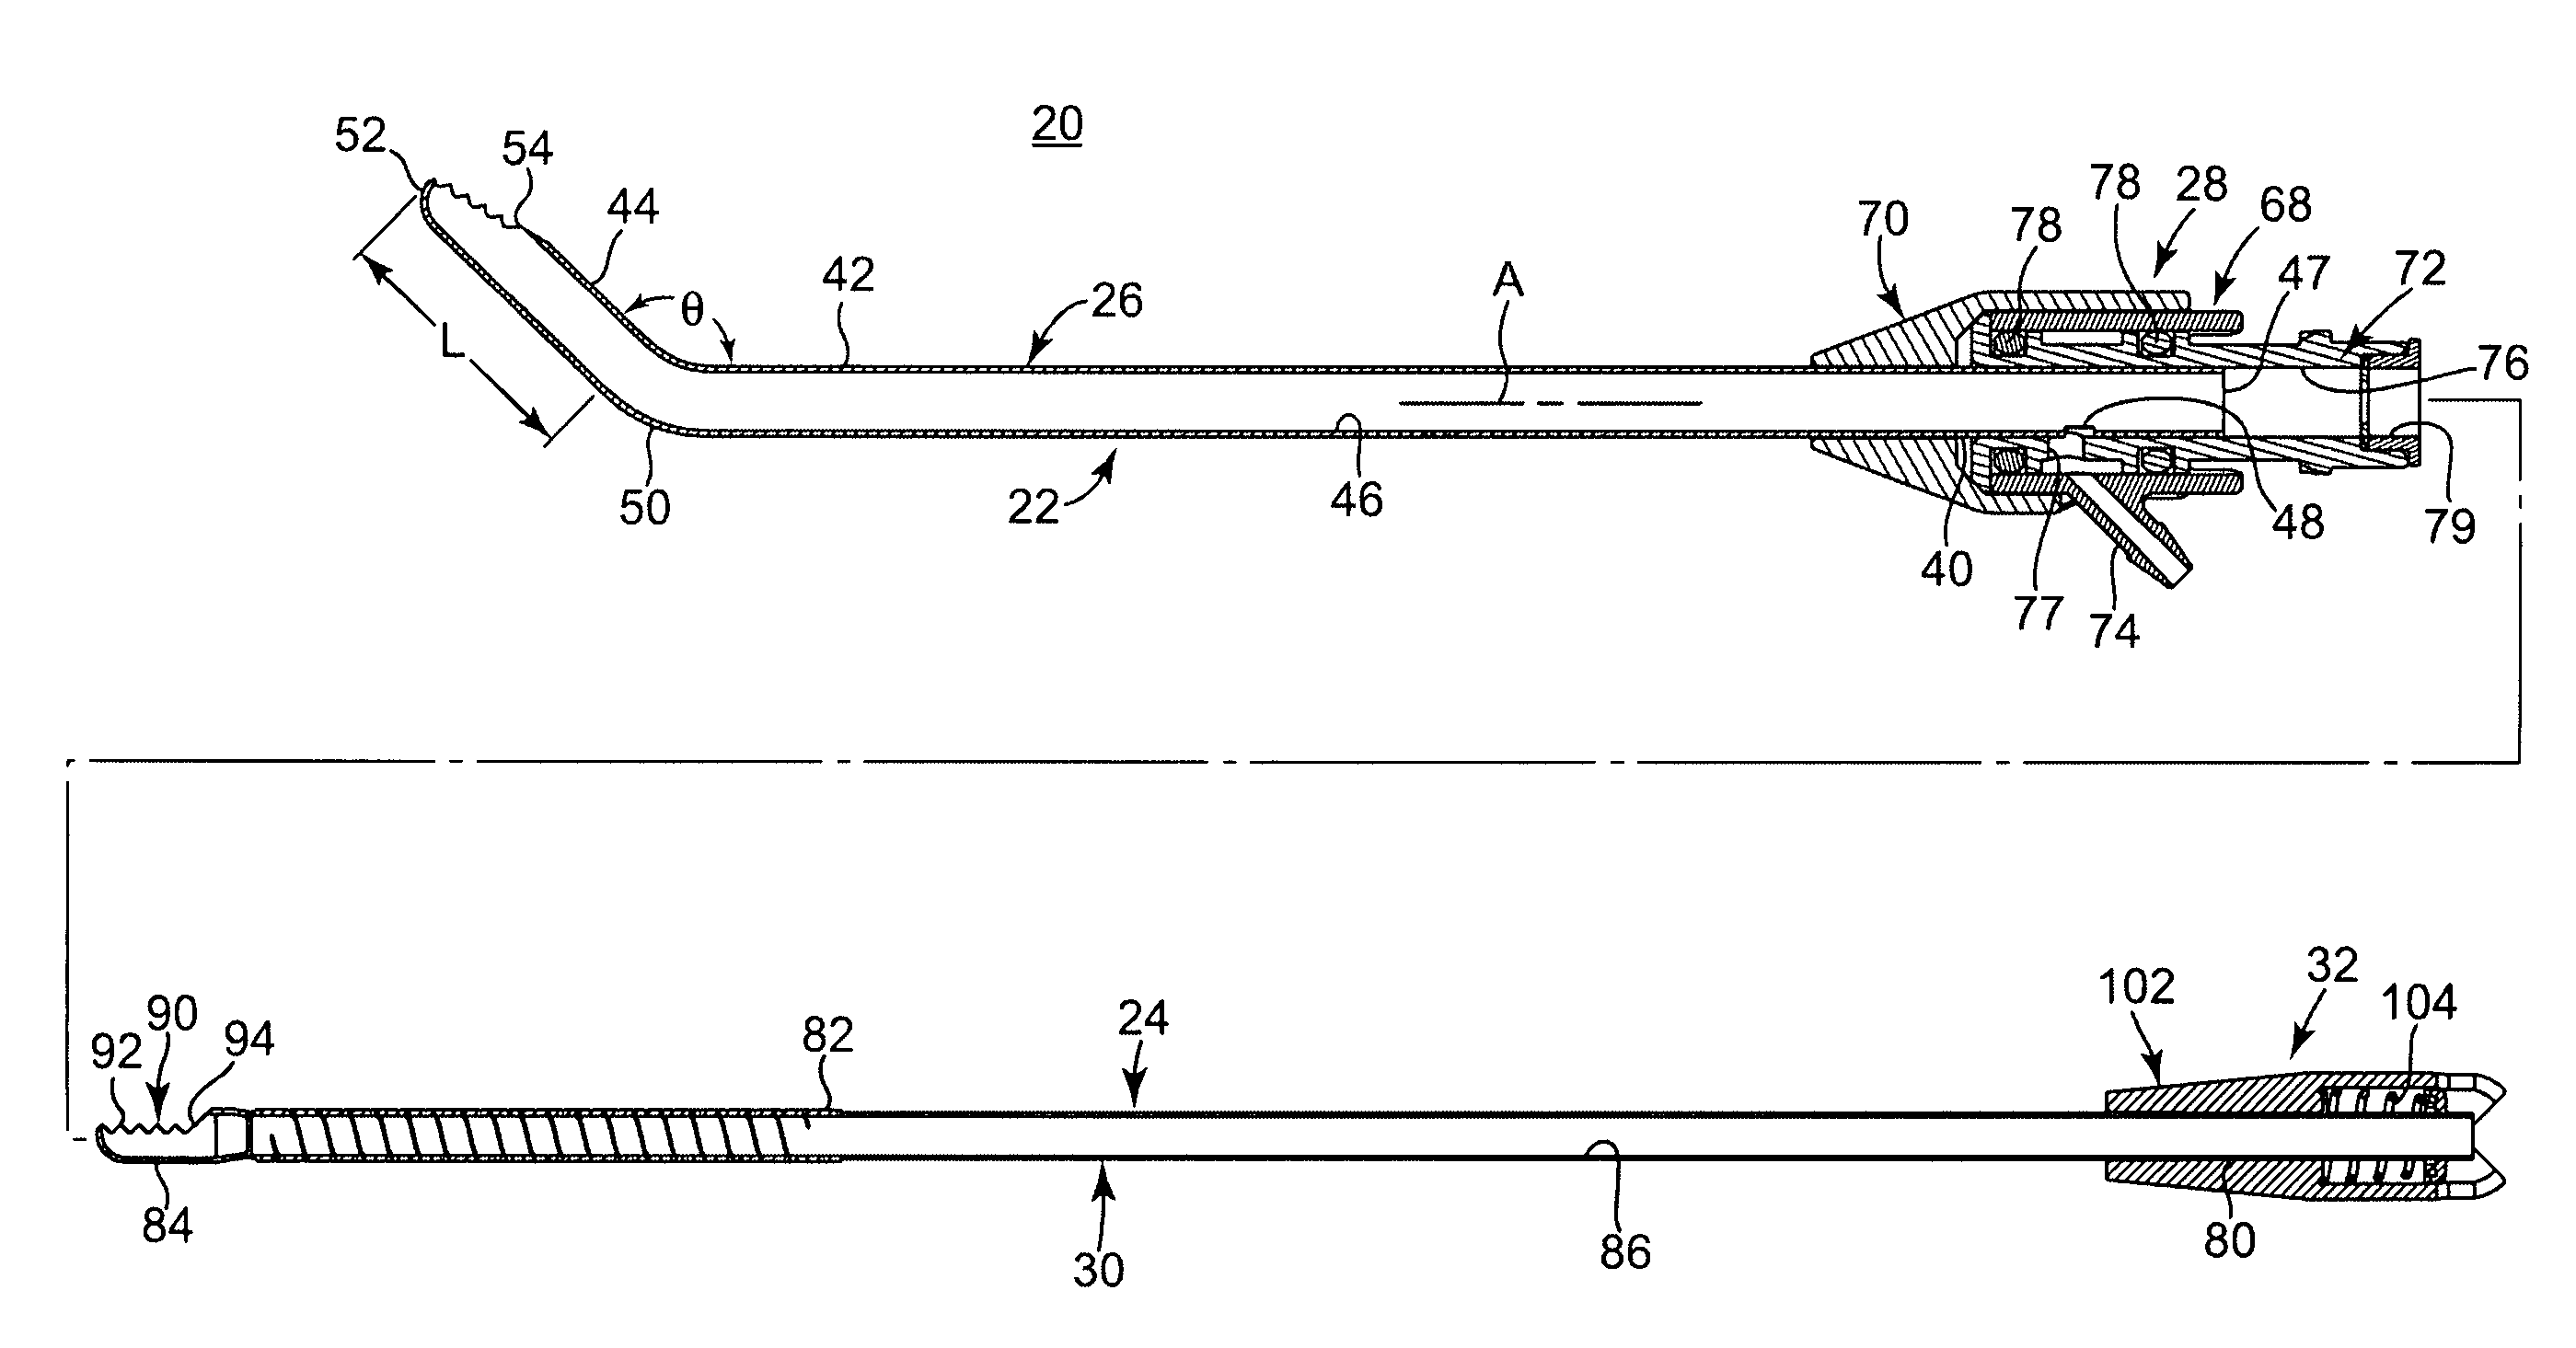 Method and apparatus for removing material from an intervertebral disc space, such as in performing a nucleotomy